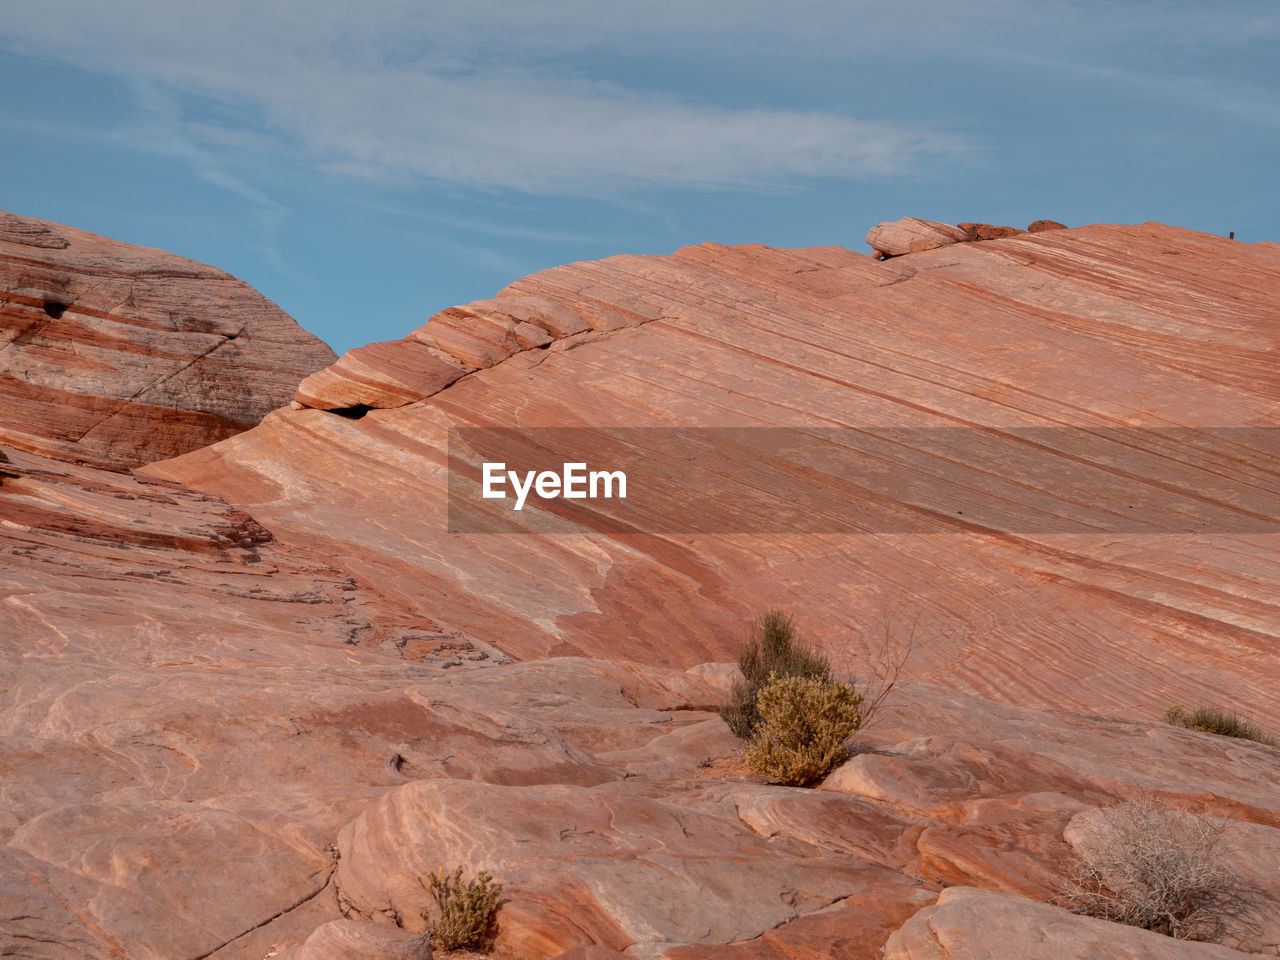 SCENIC VIEW OF ROCK FORMATIONS ON DESERT AGAINST SKY